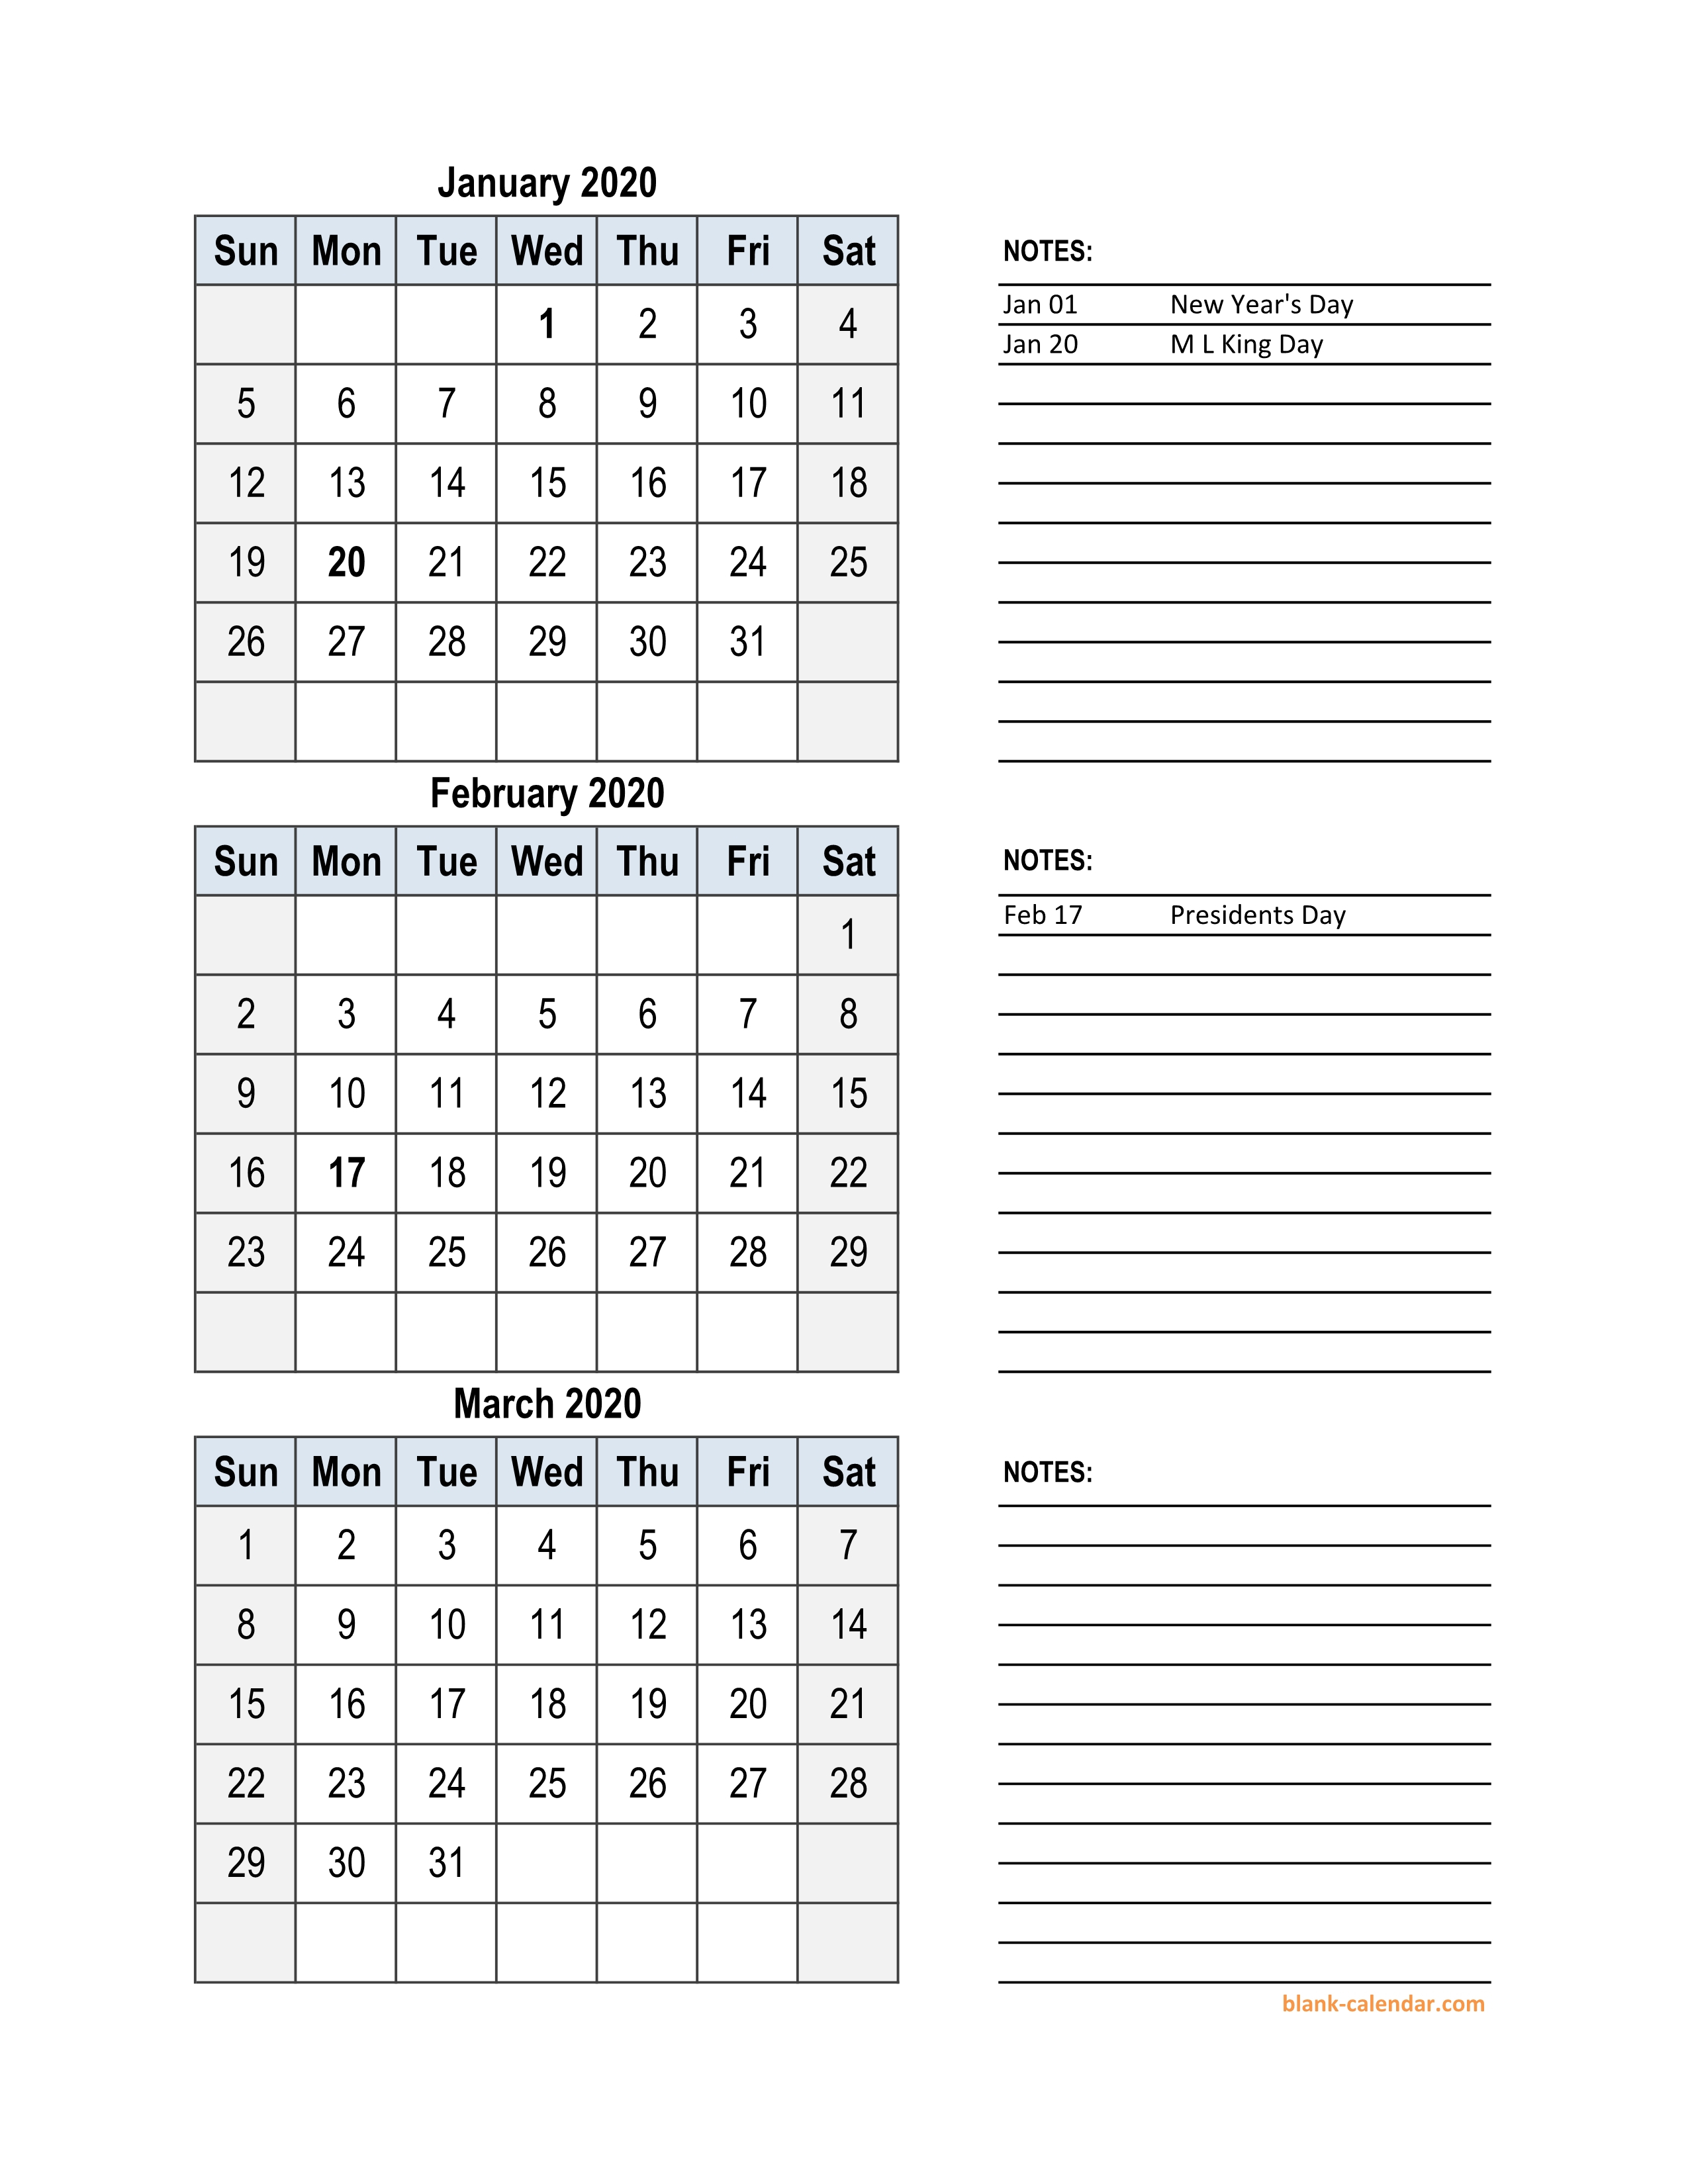 Free Download 2020 Excel Calendar, 3 Months In One Excel throughout 3 Month Calendar 2020 Excel